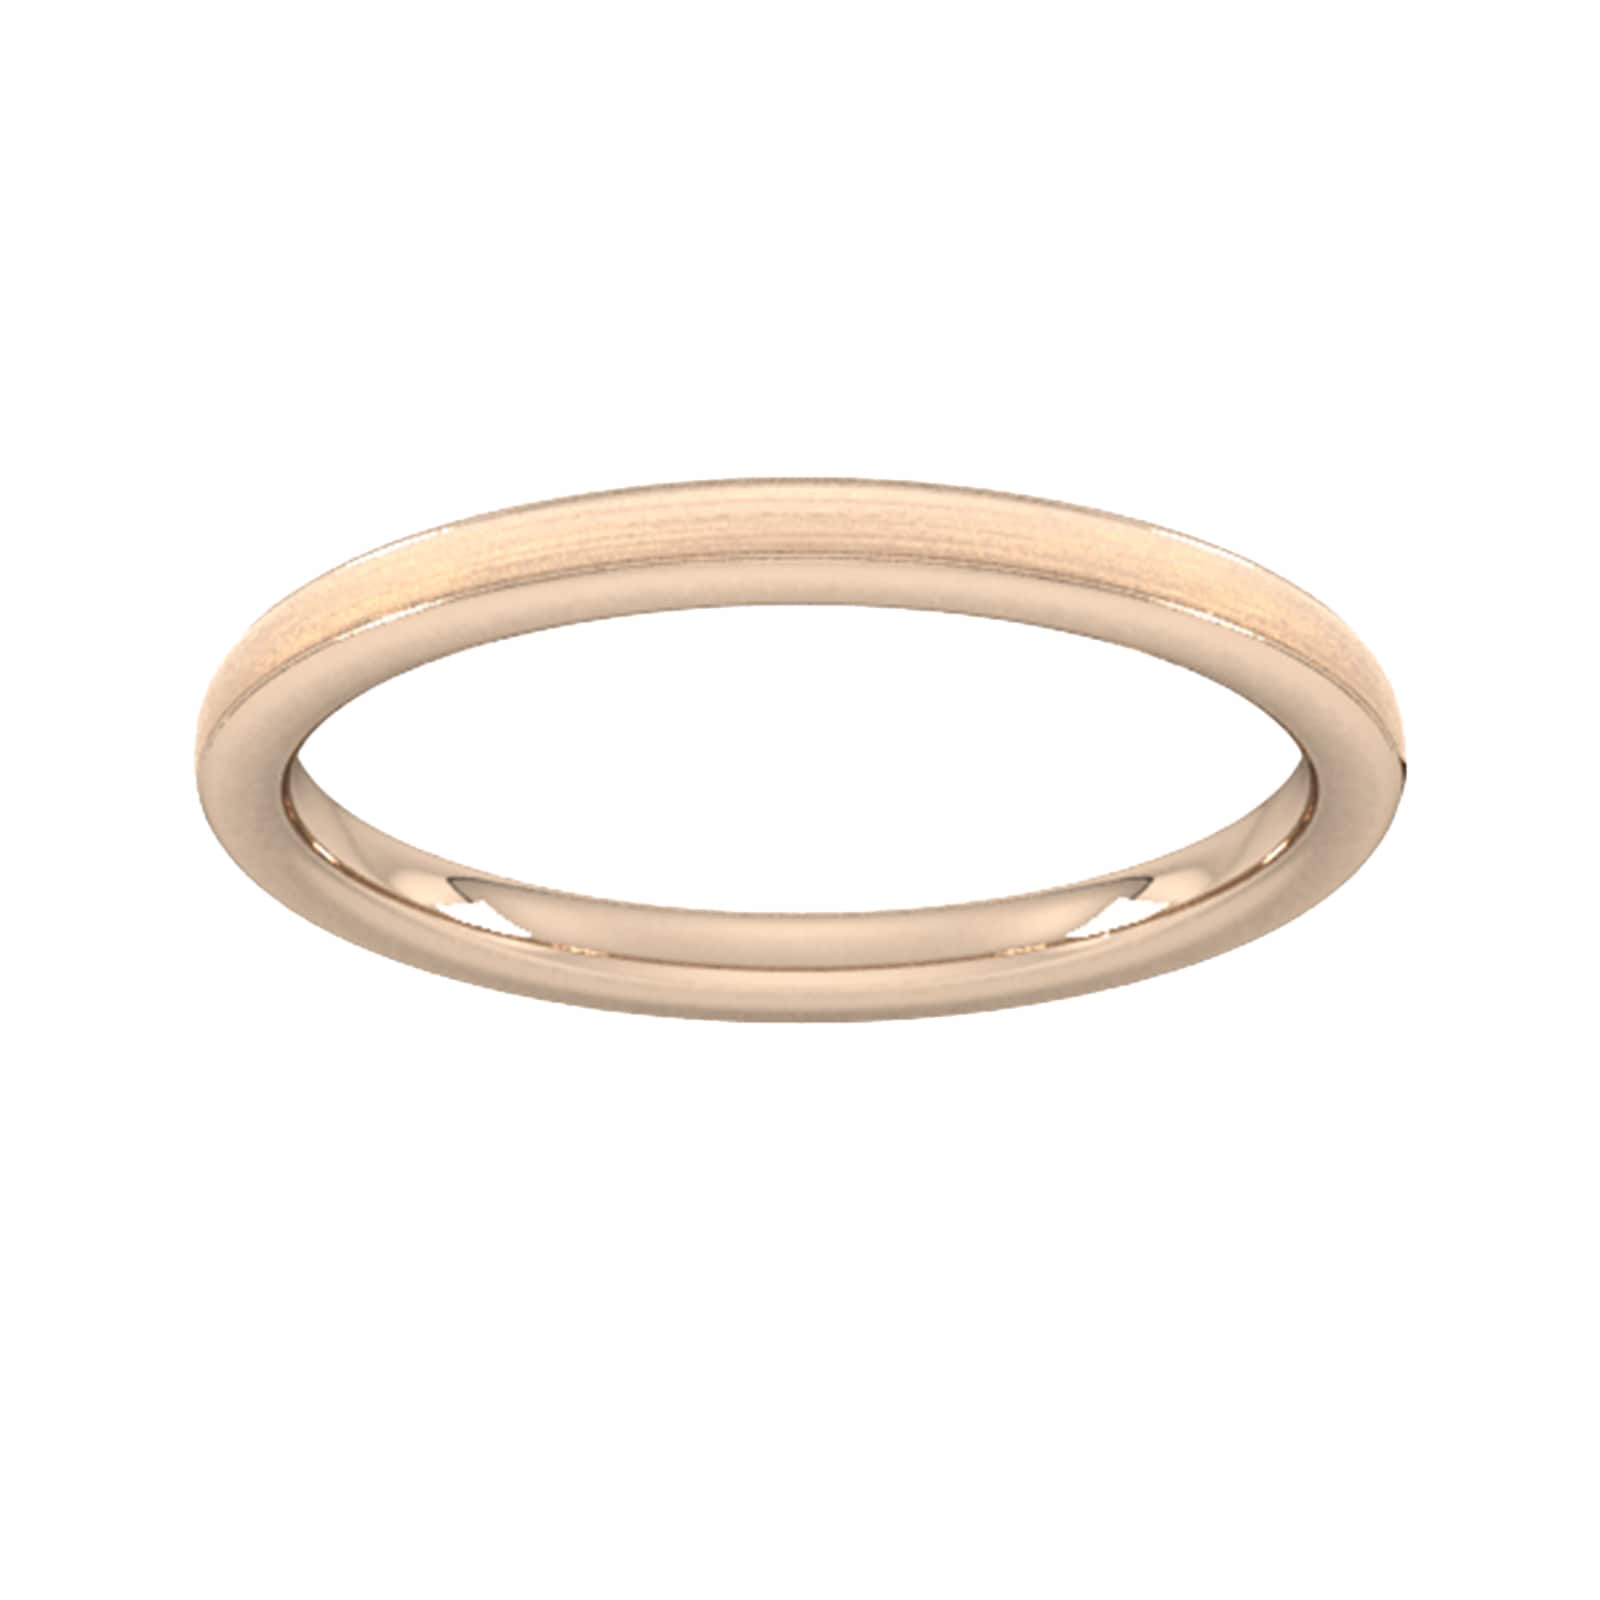 2mm Traditional Court Standard Matt Centre With Grooves Wedding Ring In 18 Carat Rose Gold - Ring Size O